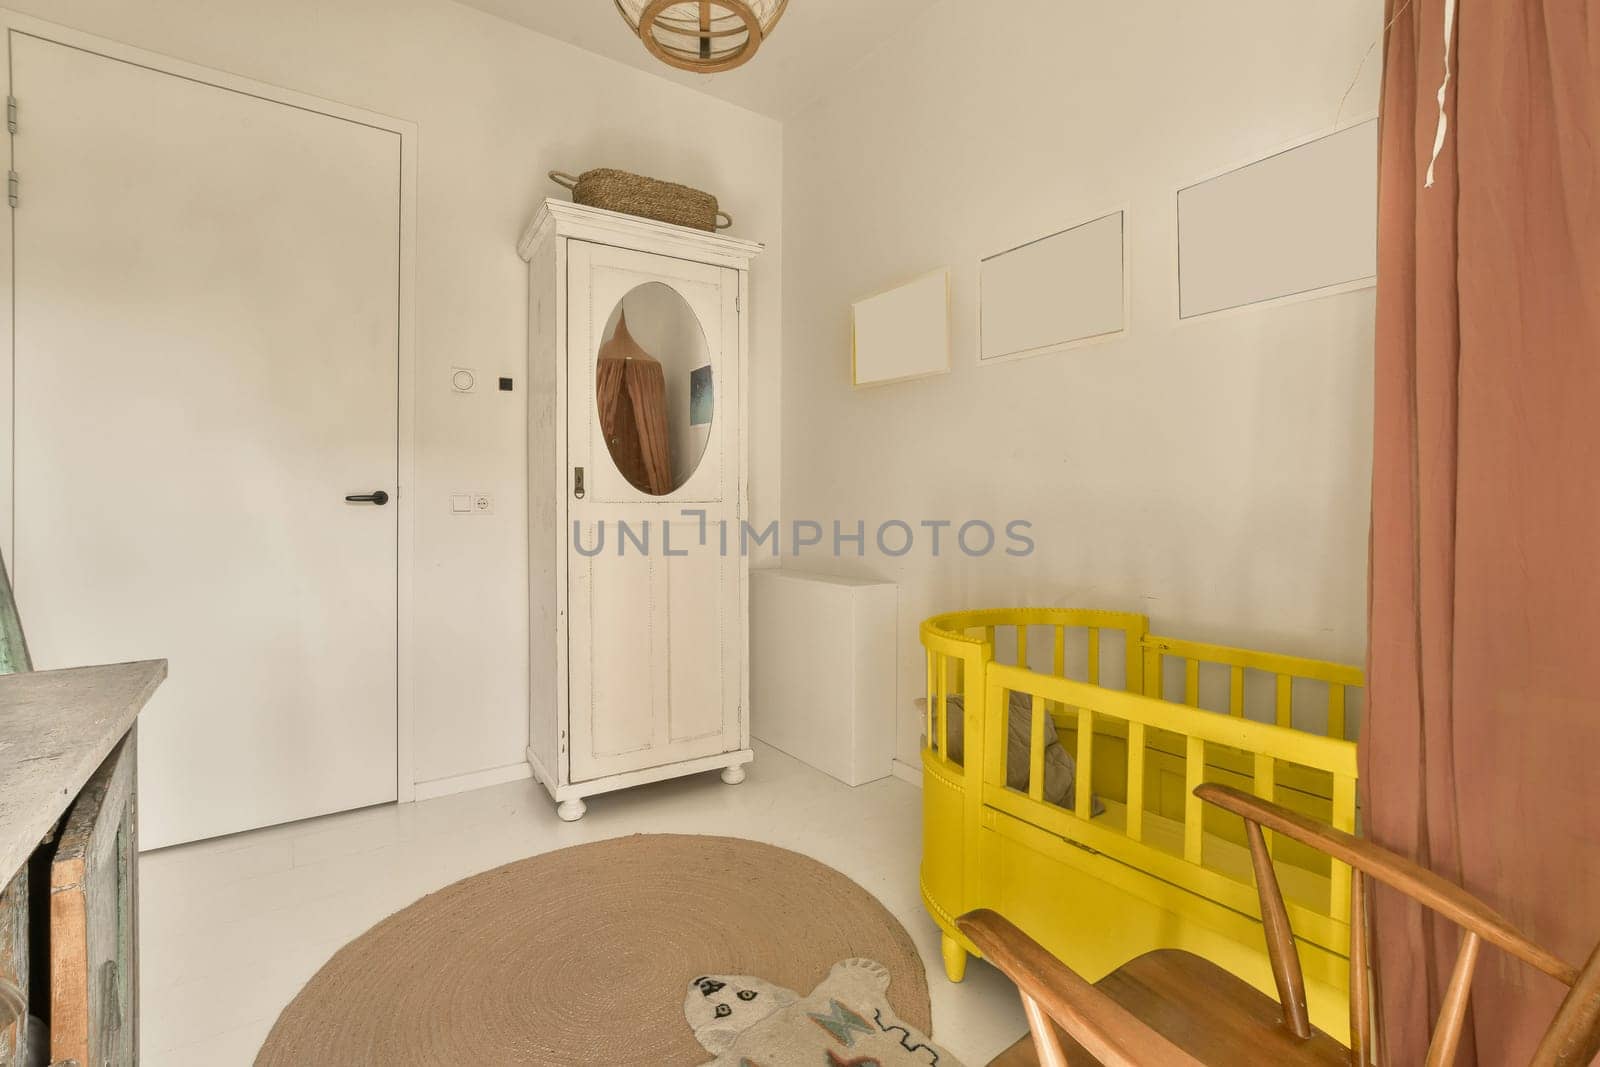 a yellow bench in the corner of a room with a mirror on the wall and door to the other room